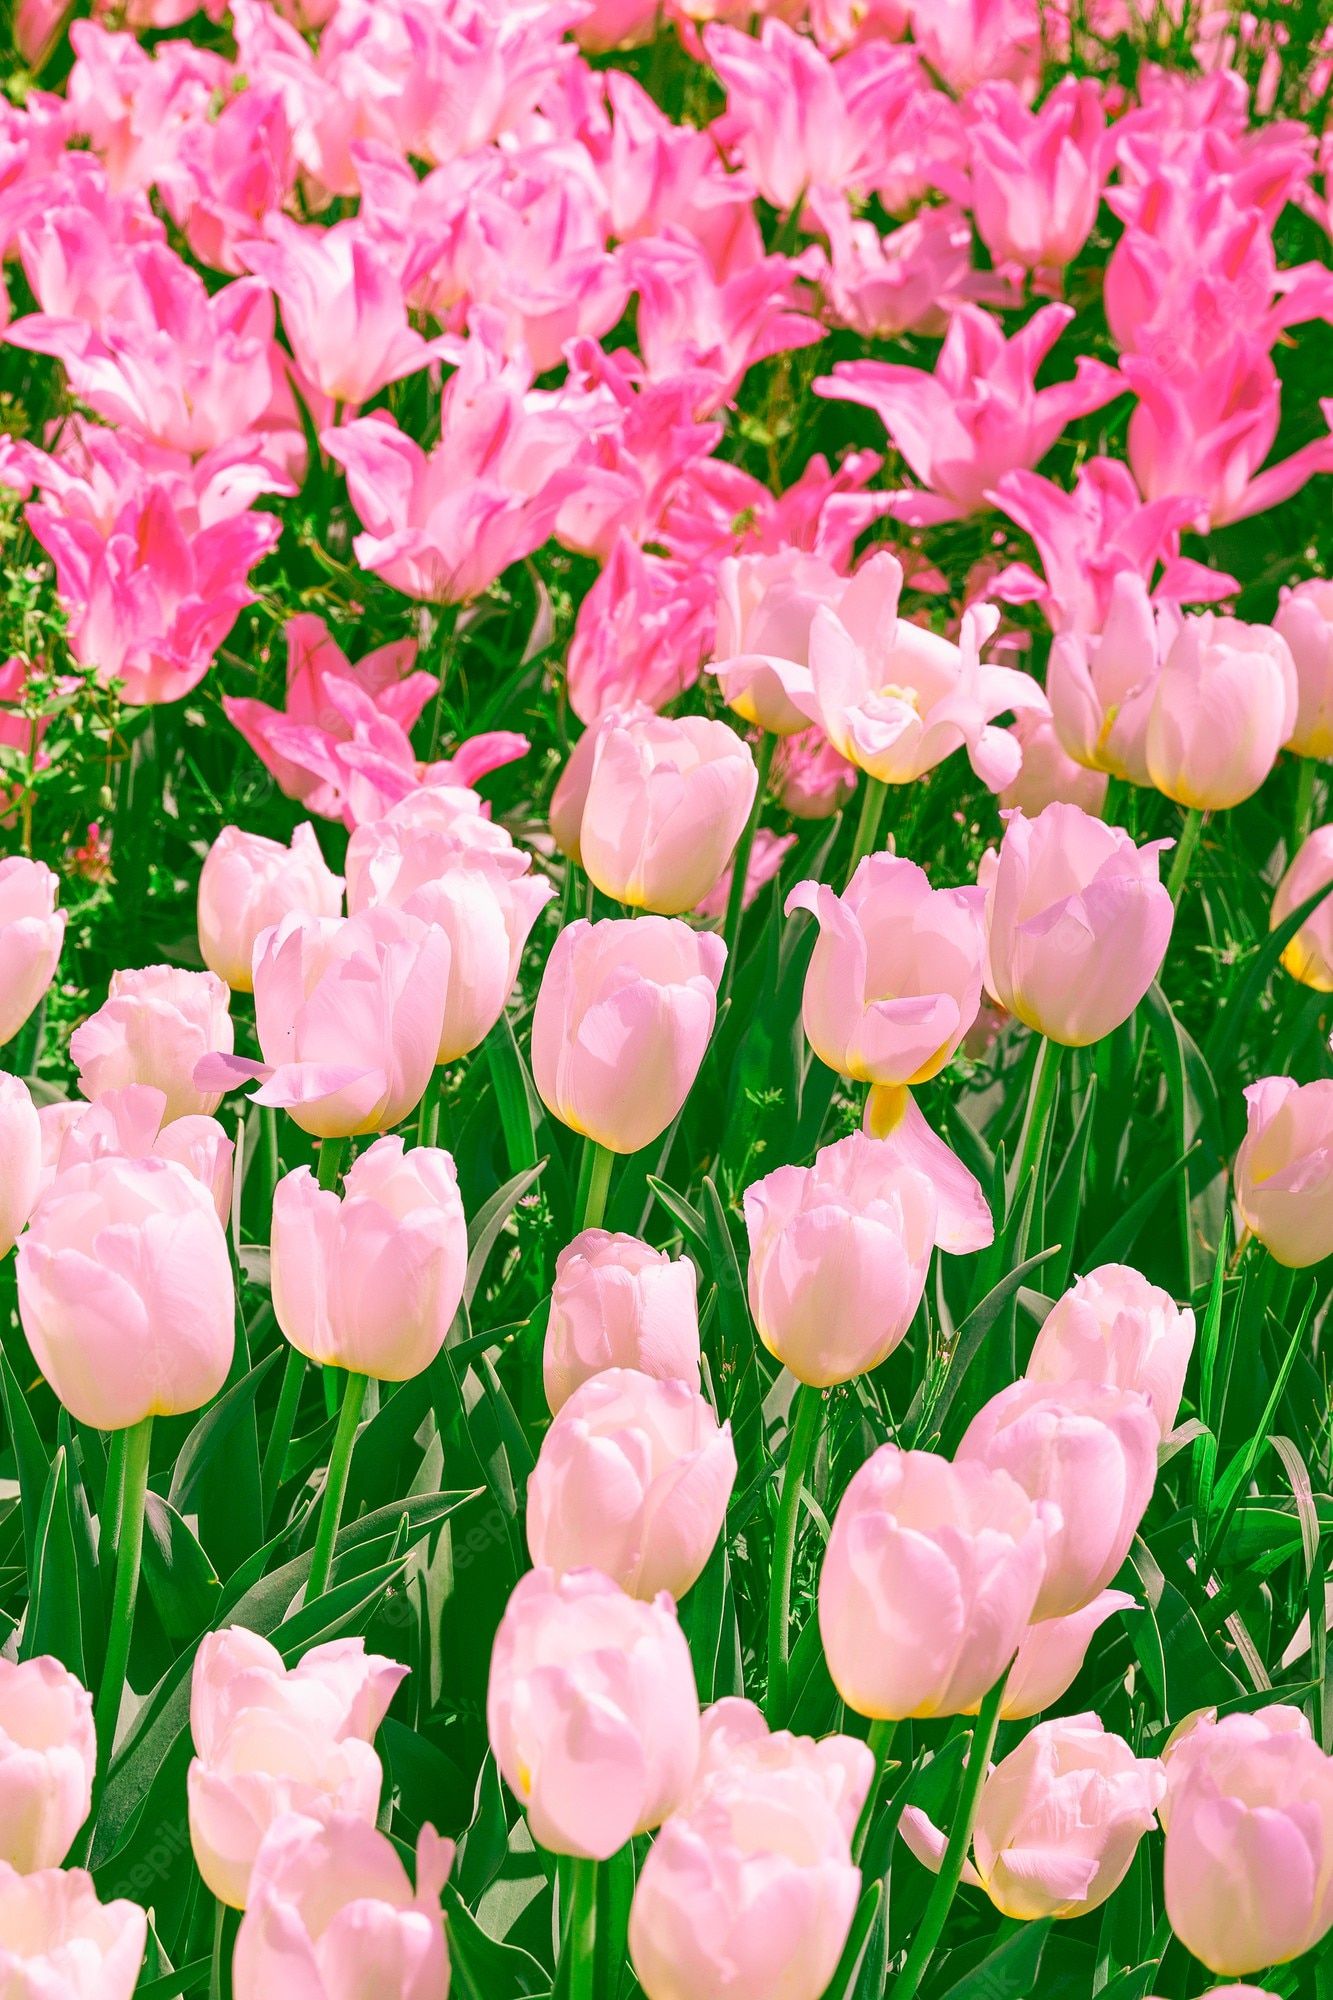 A pink and white flower field with many flowers - Tulip